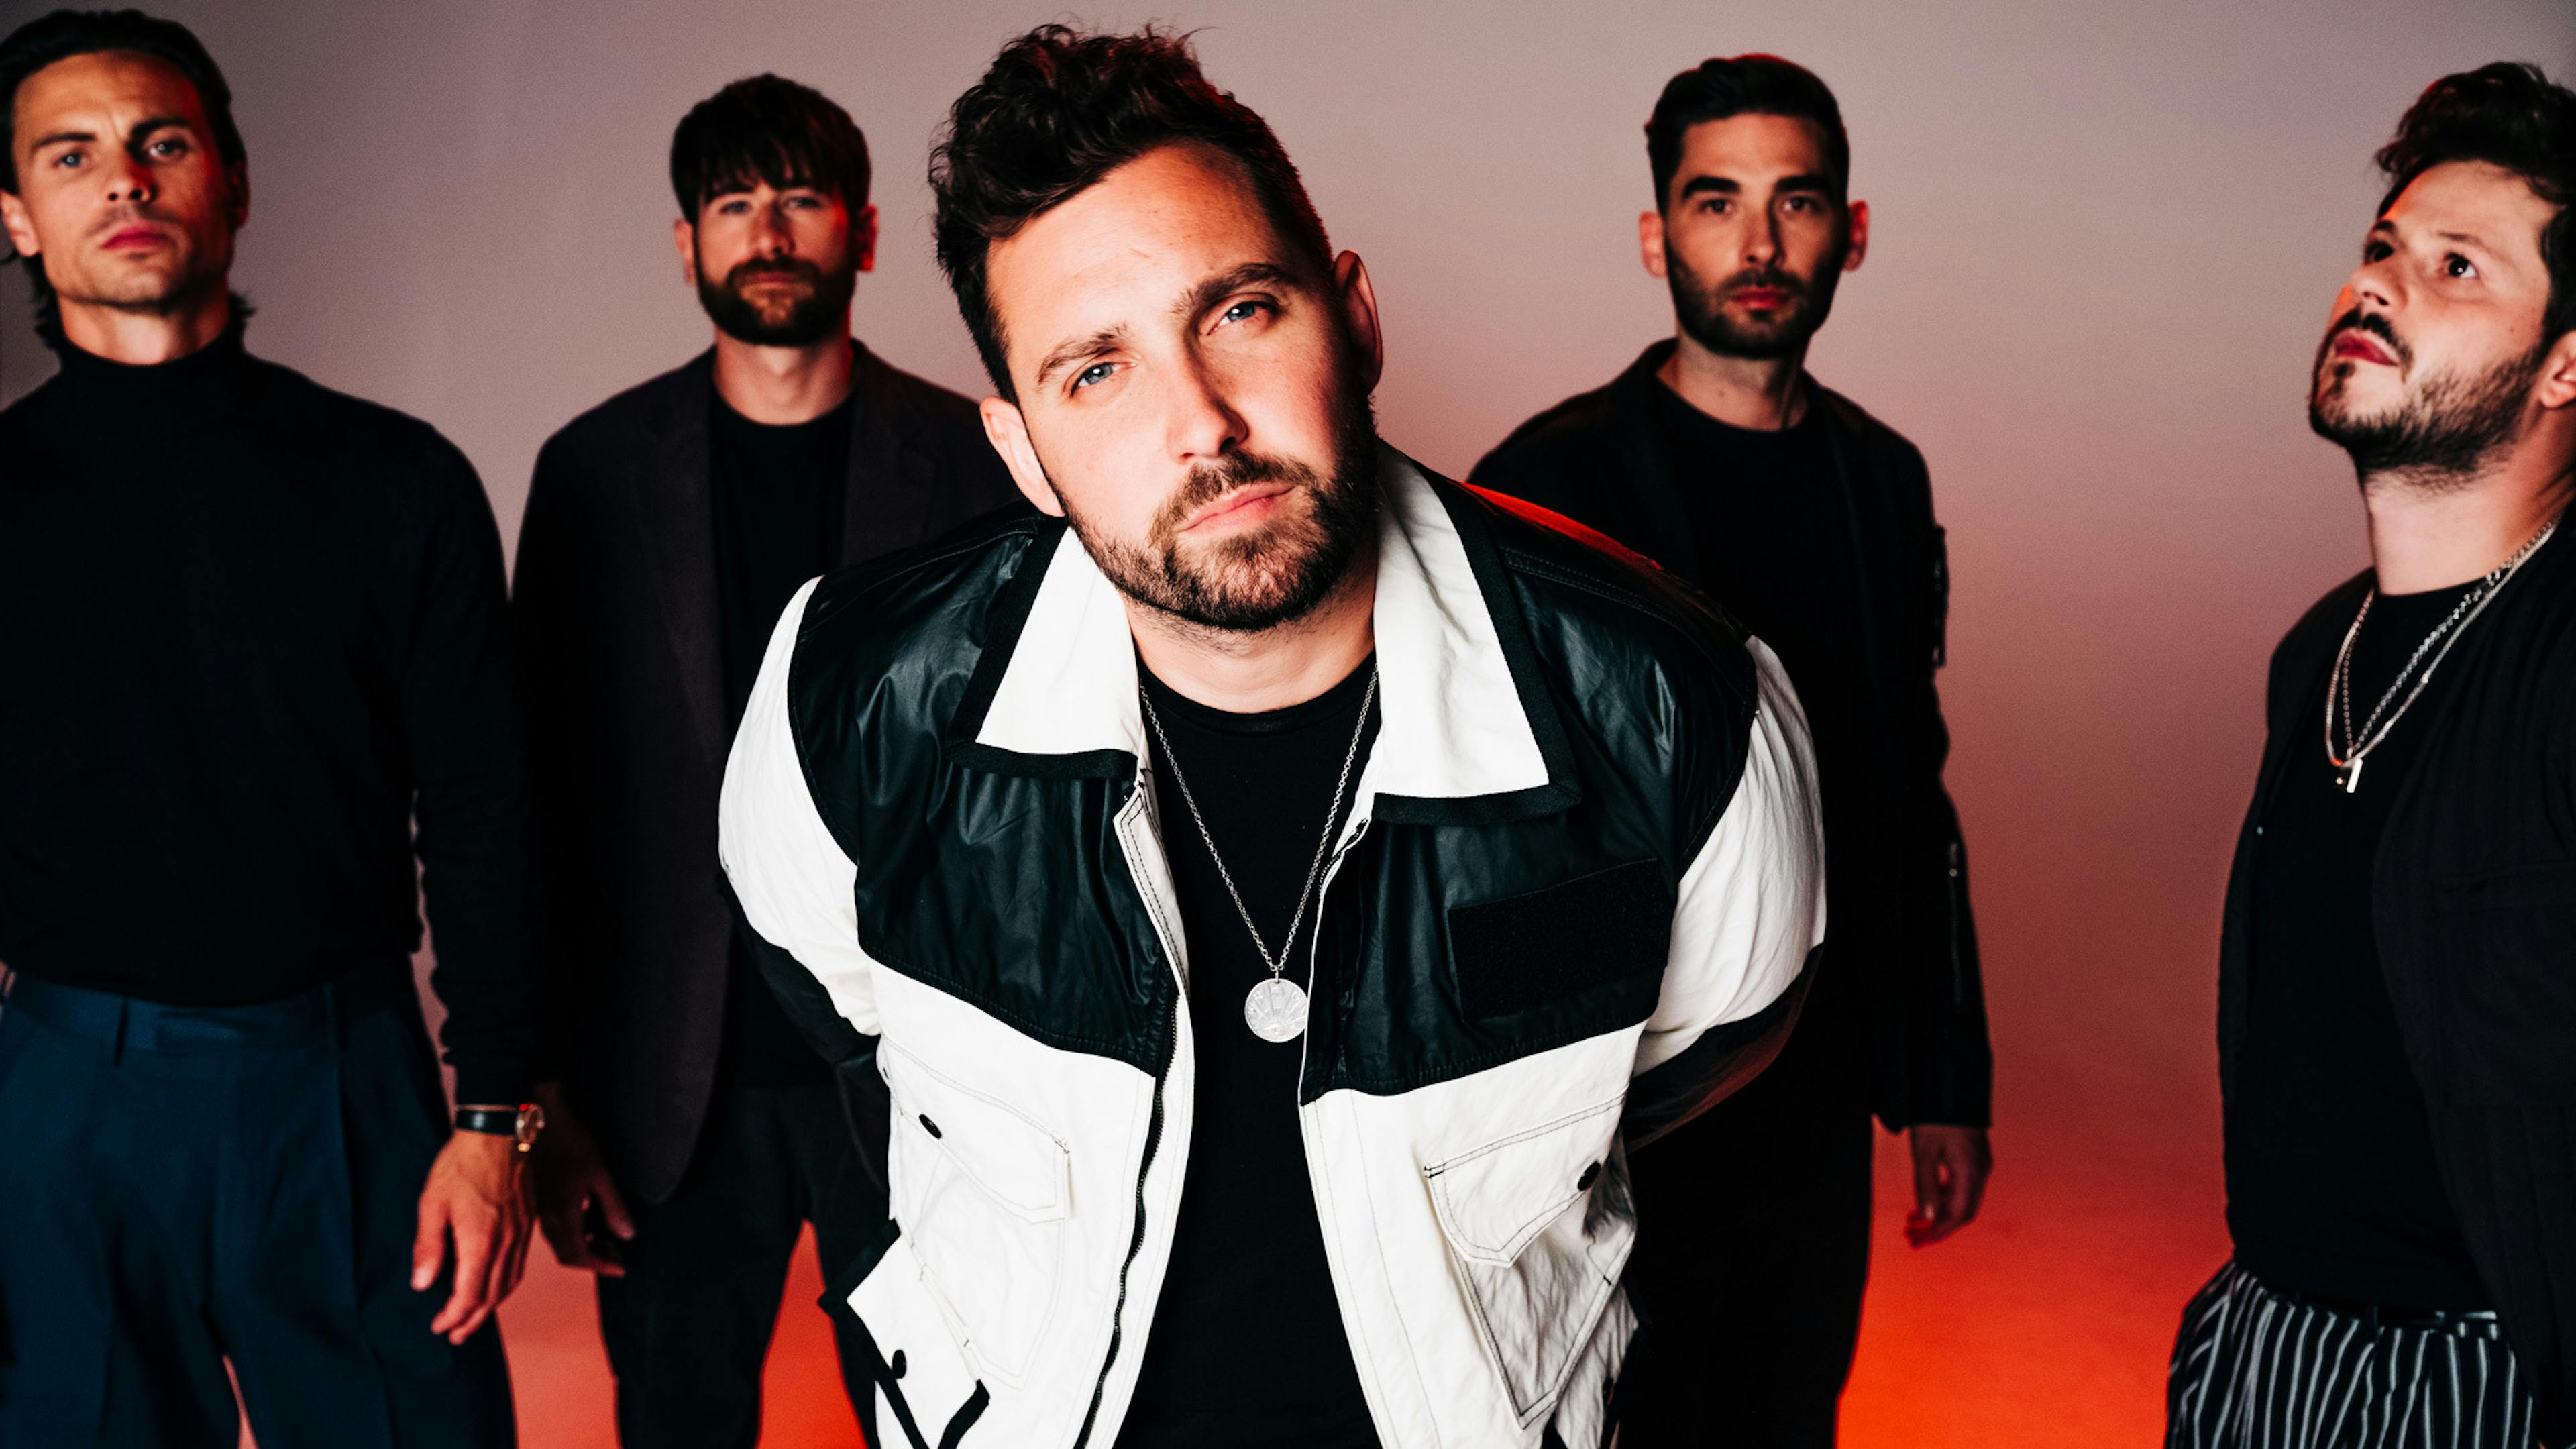 Win the ultimate You Me At Six fan experience and join Josh Franceschi live on K!’s Instagram